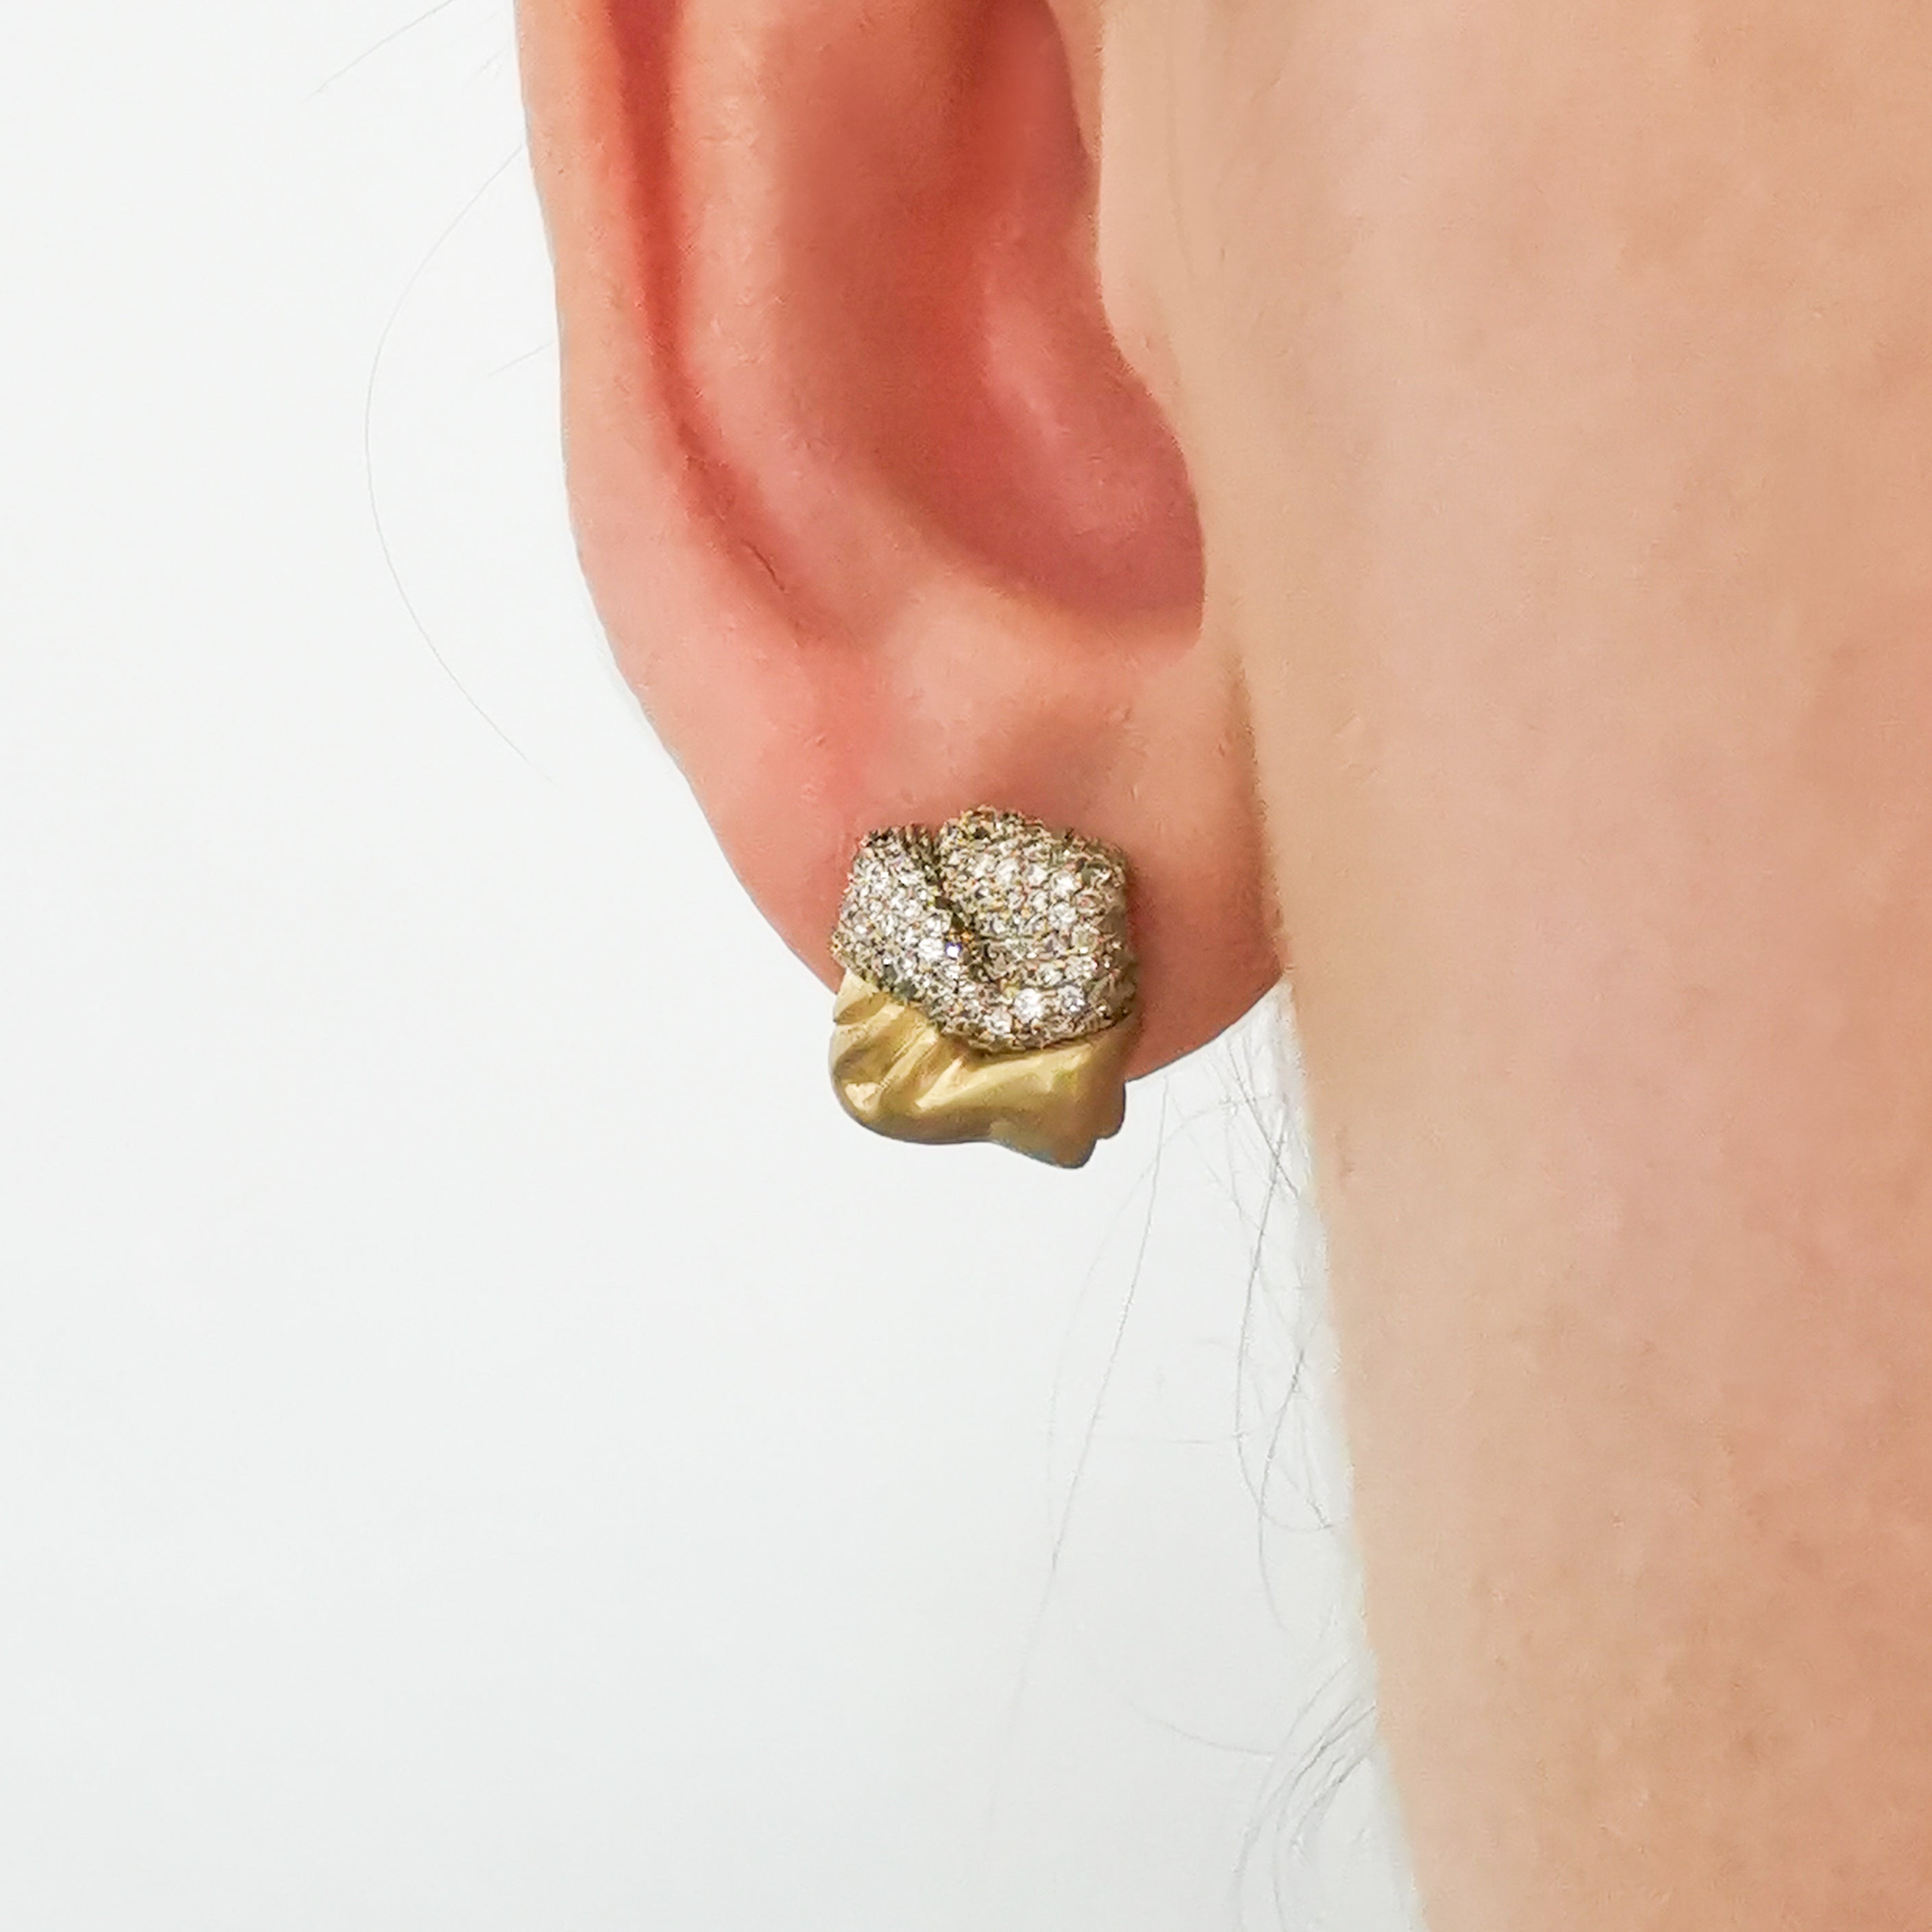 E 0132-4, 18K Yellow Gold, White and Champagne Diamonds Stud Earrings